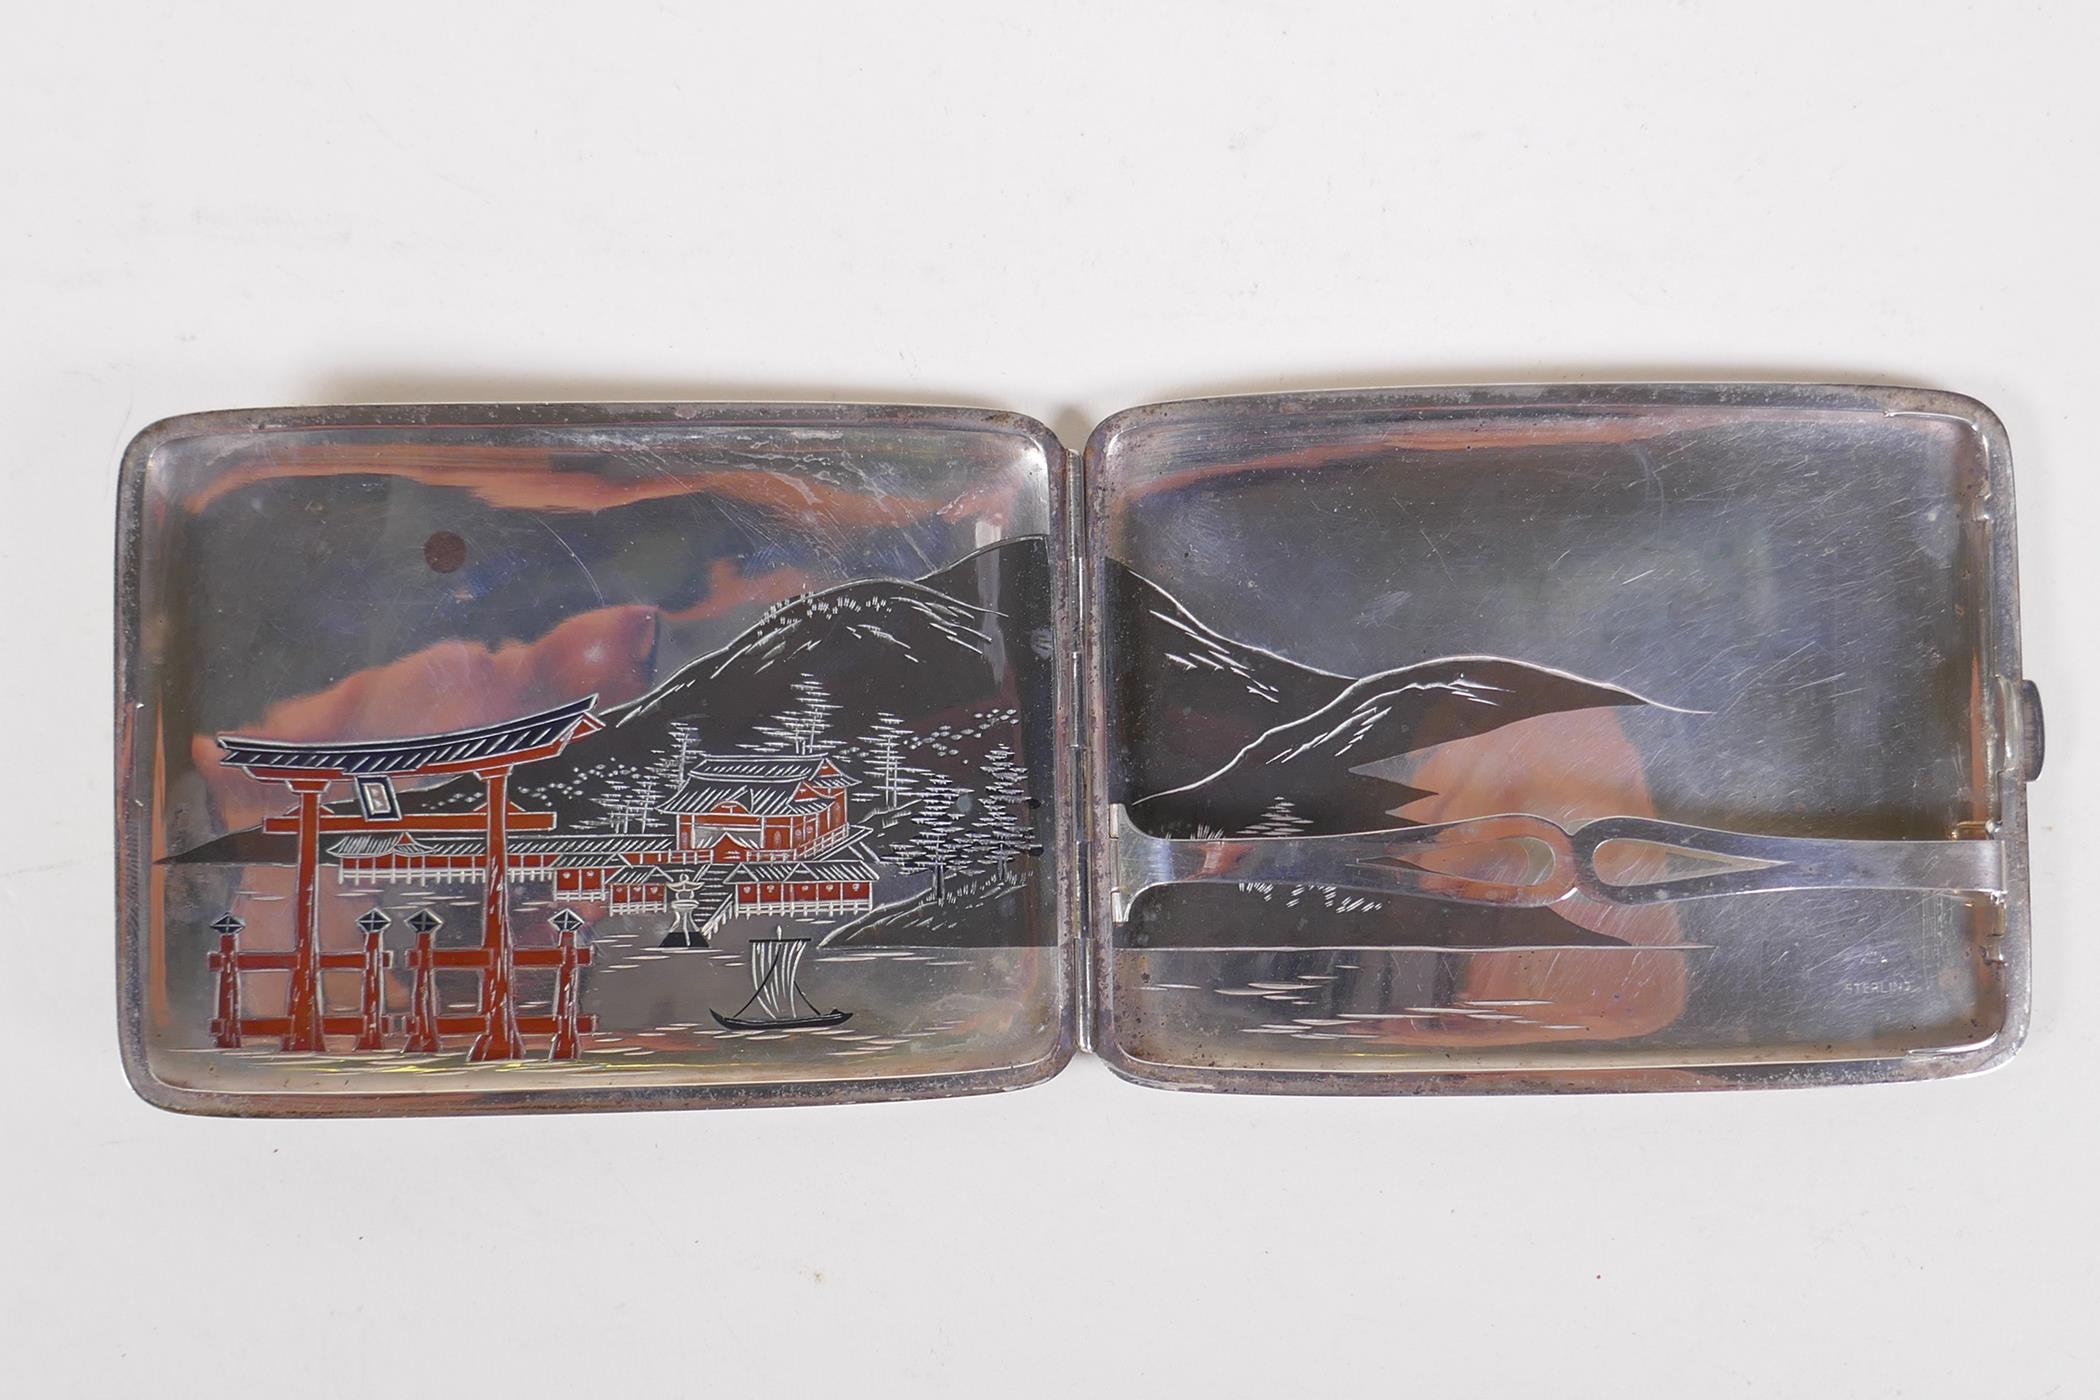 An early C20th Japanese sterling silver cigarette case with engraved decoration depicting the - Image 4 of 4